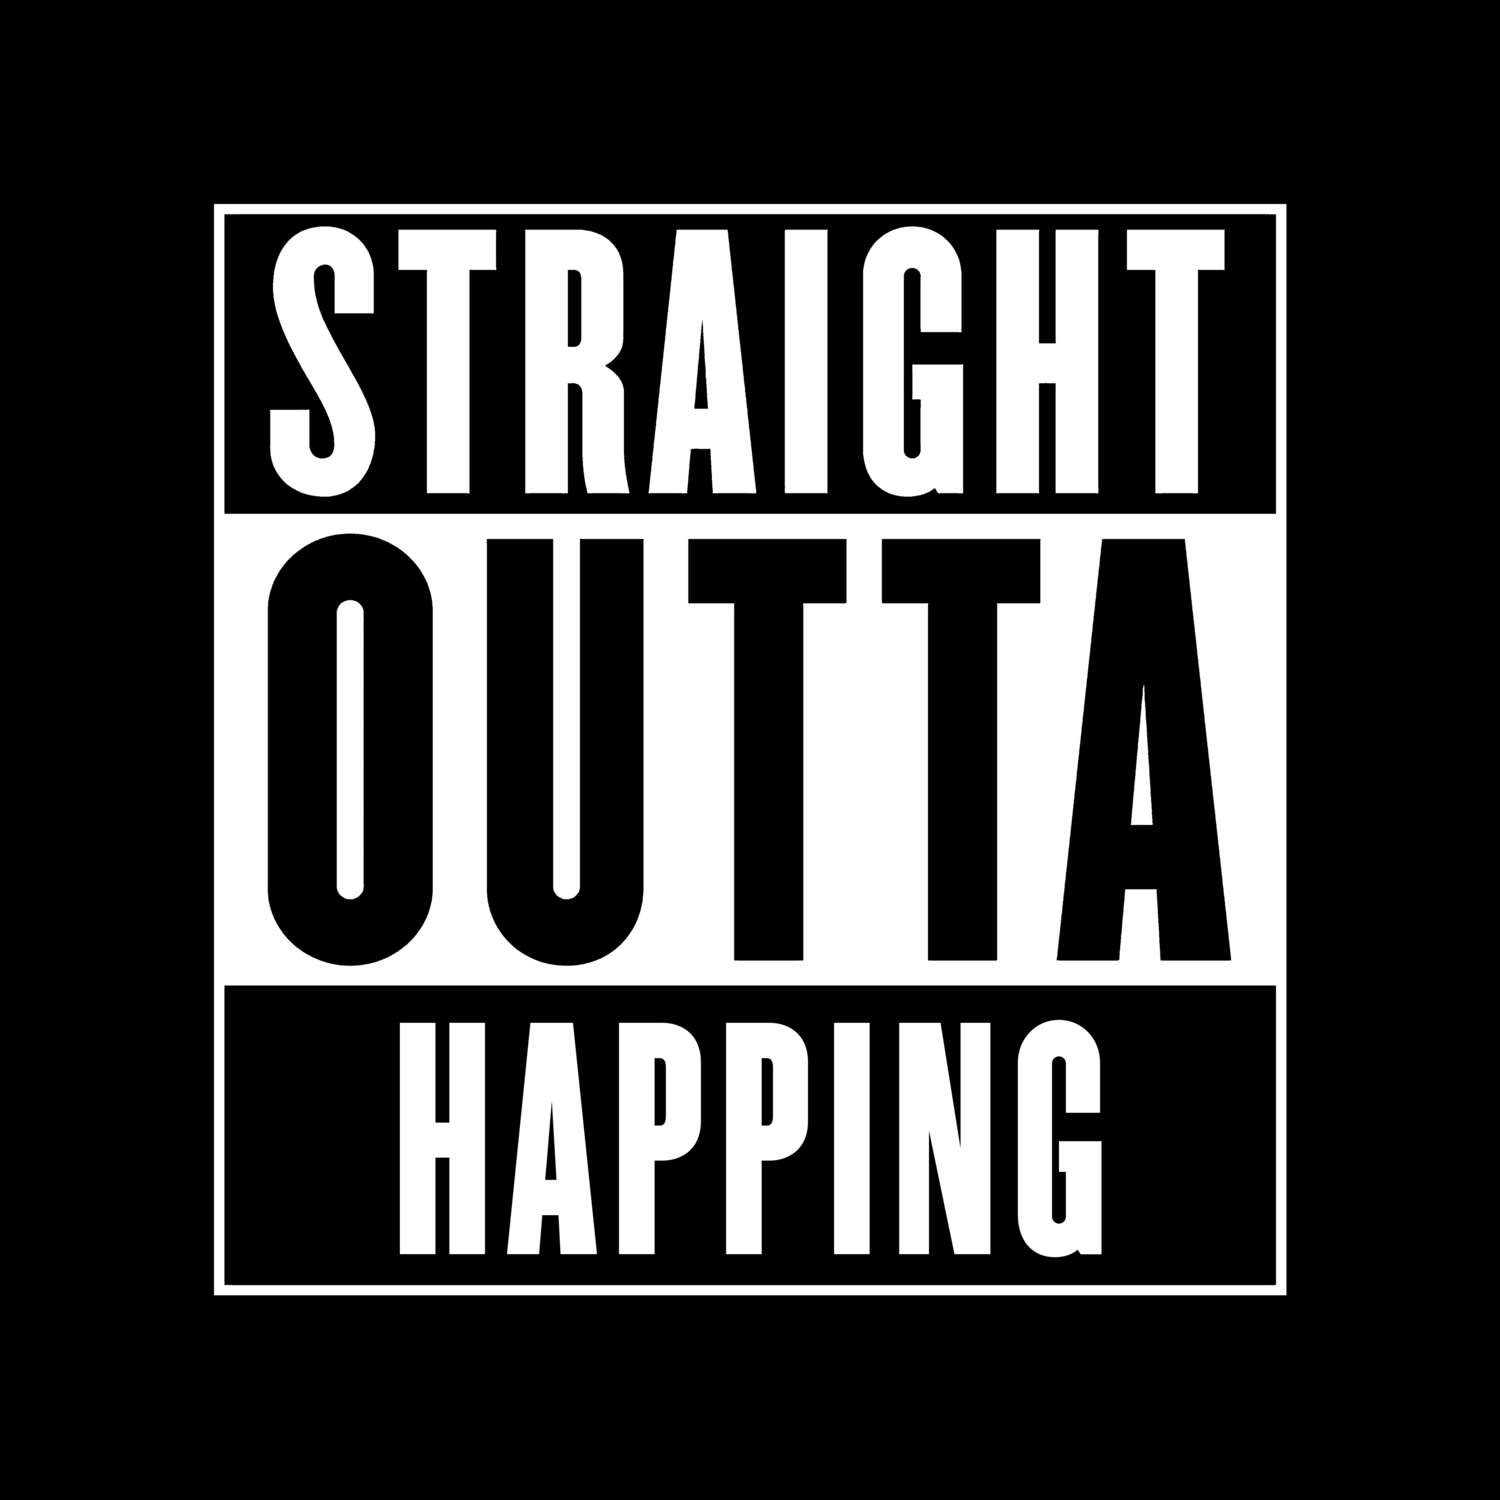 Happing T-Shirt »Straight Outta«